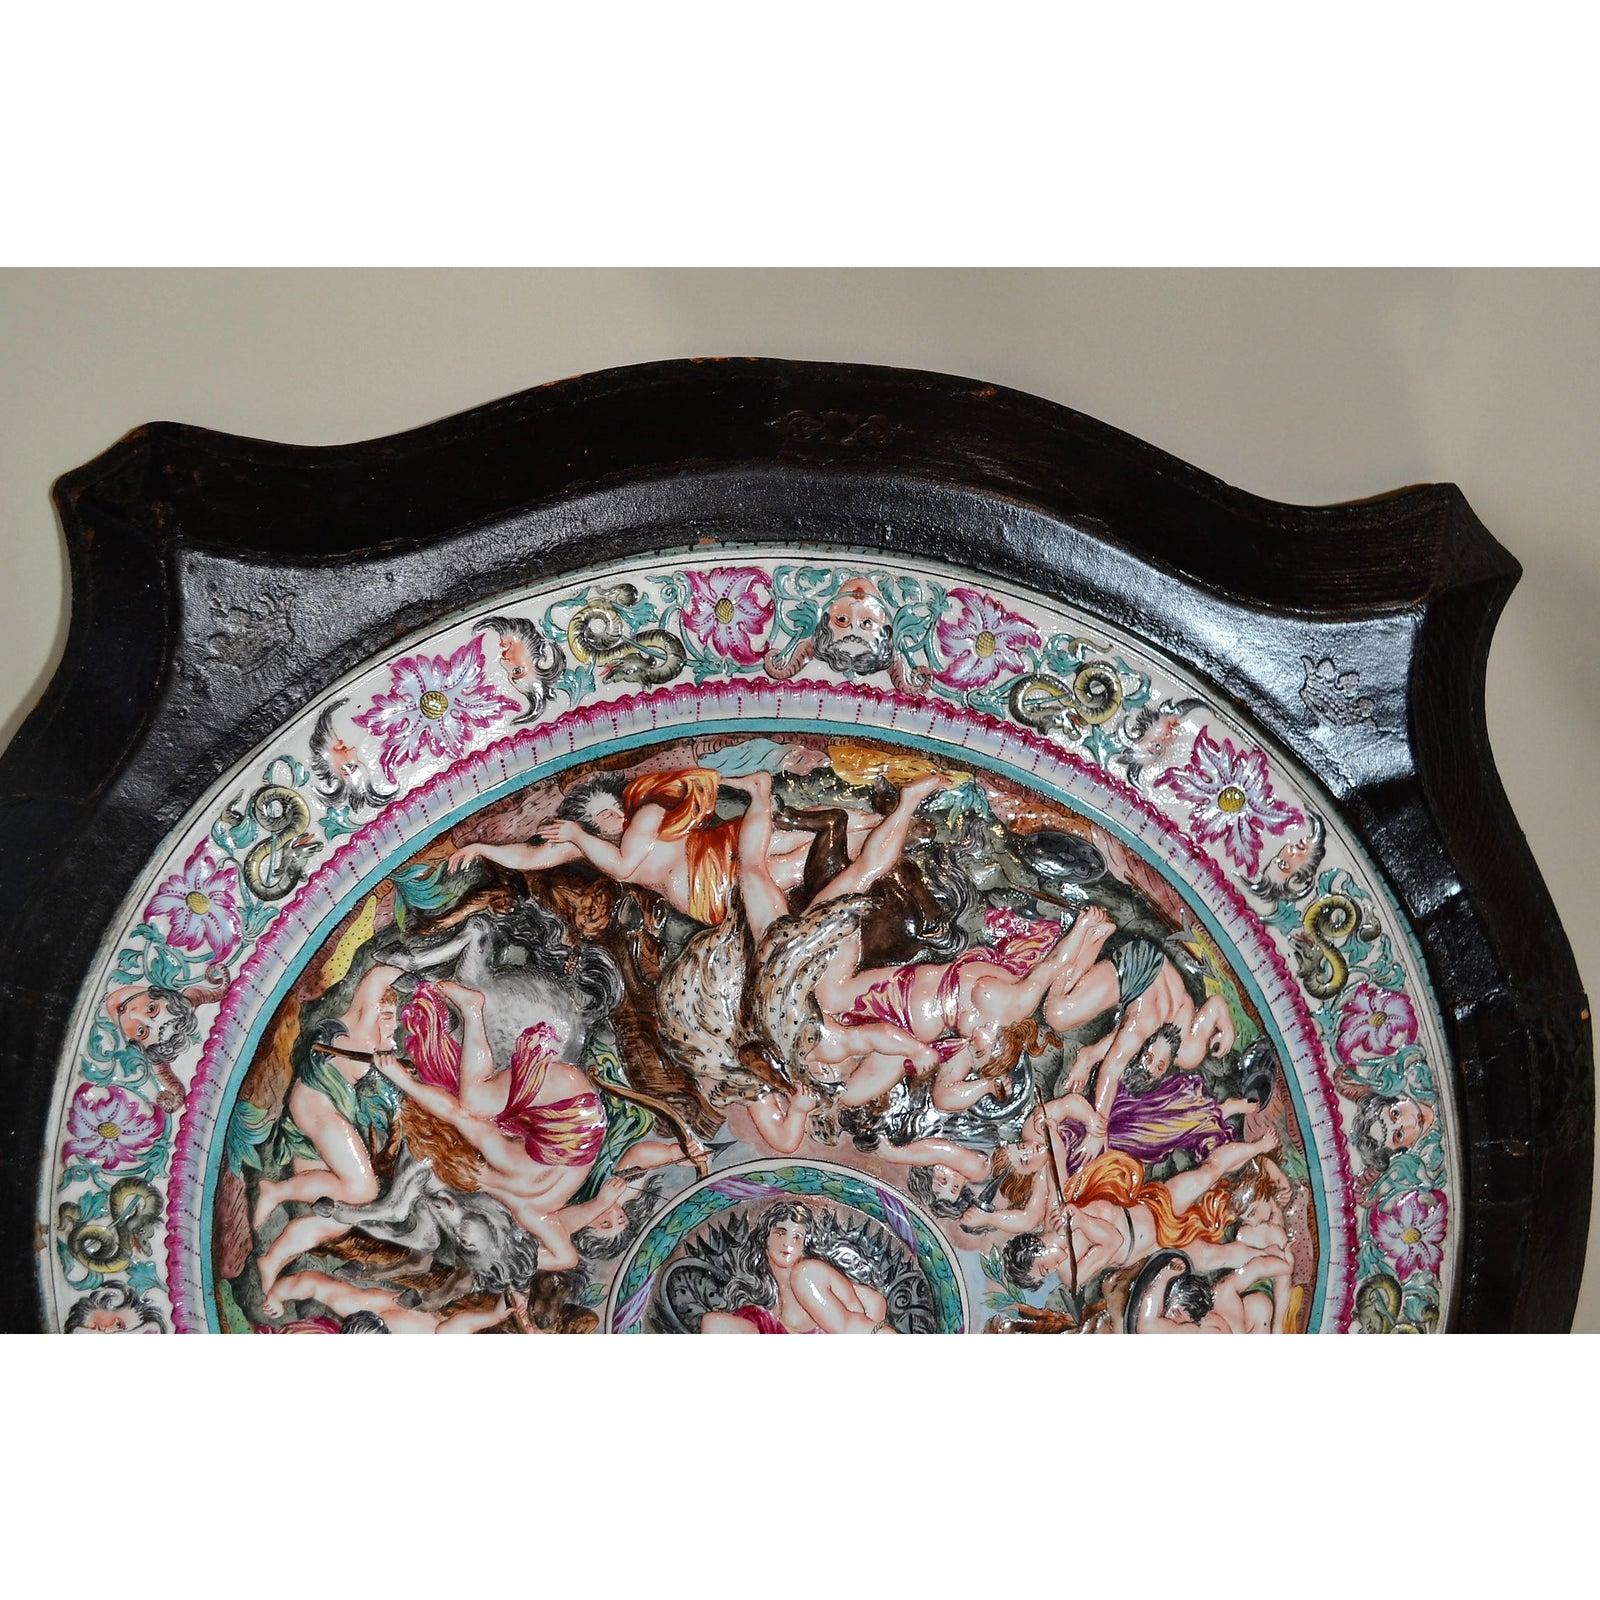 Antique Capo Di Monte Porcelain Shield in Wooden Frame In Good Condition For Sale In New Orleans, LA